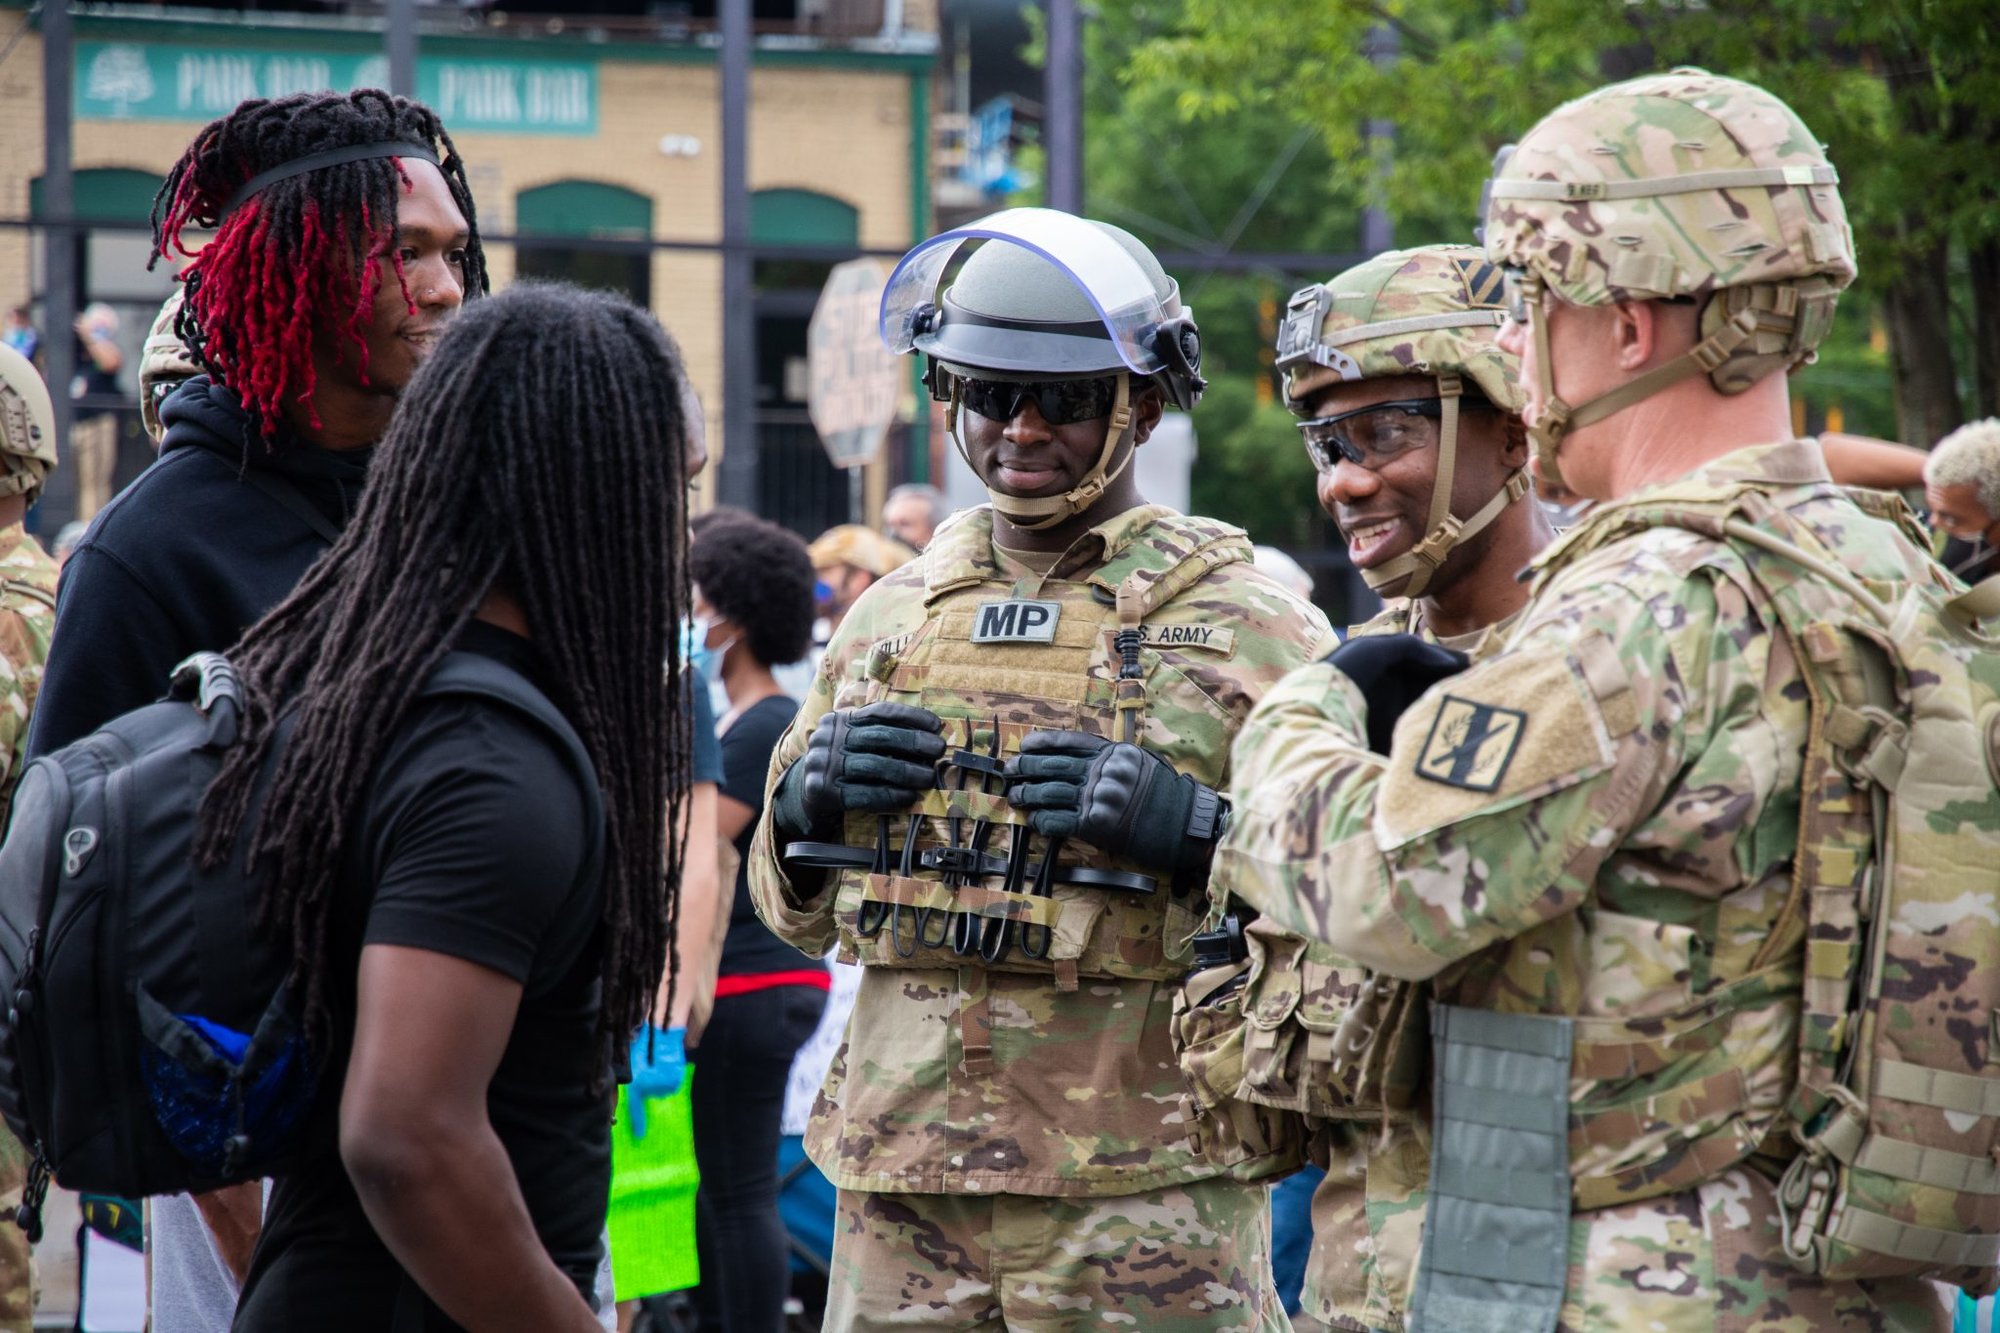 U.S. Soldiers with the Georgia National Guard share a lighthearted moment with citizens attending a peaceful protest near Centennial Olympic Park in Atlanta, Georgia, June 5, 2020. Georgia National Guardsmen are assisting law enforcement agencies to protect property, prevent destruction of infrastructure, and ensure the safety of Georgia citizens. (U.S. Air National Guard photo by Senior Master Sgt. Roger Parsons)